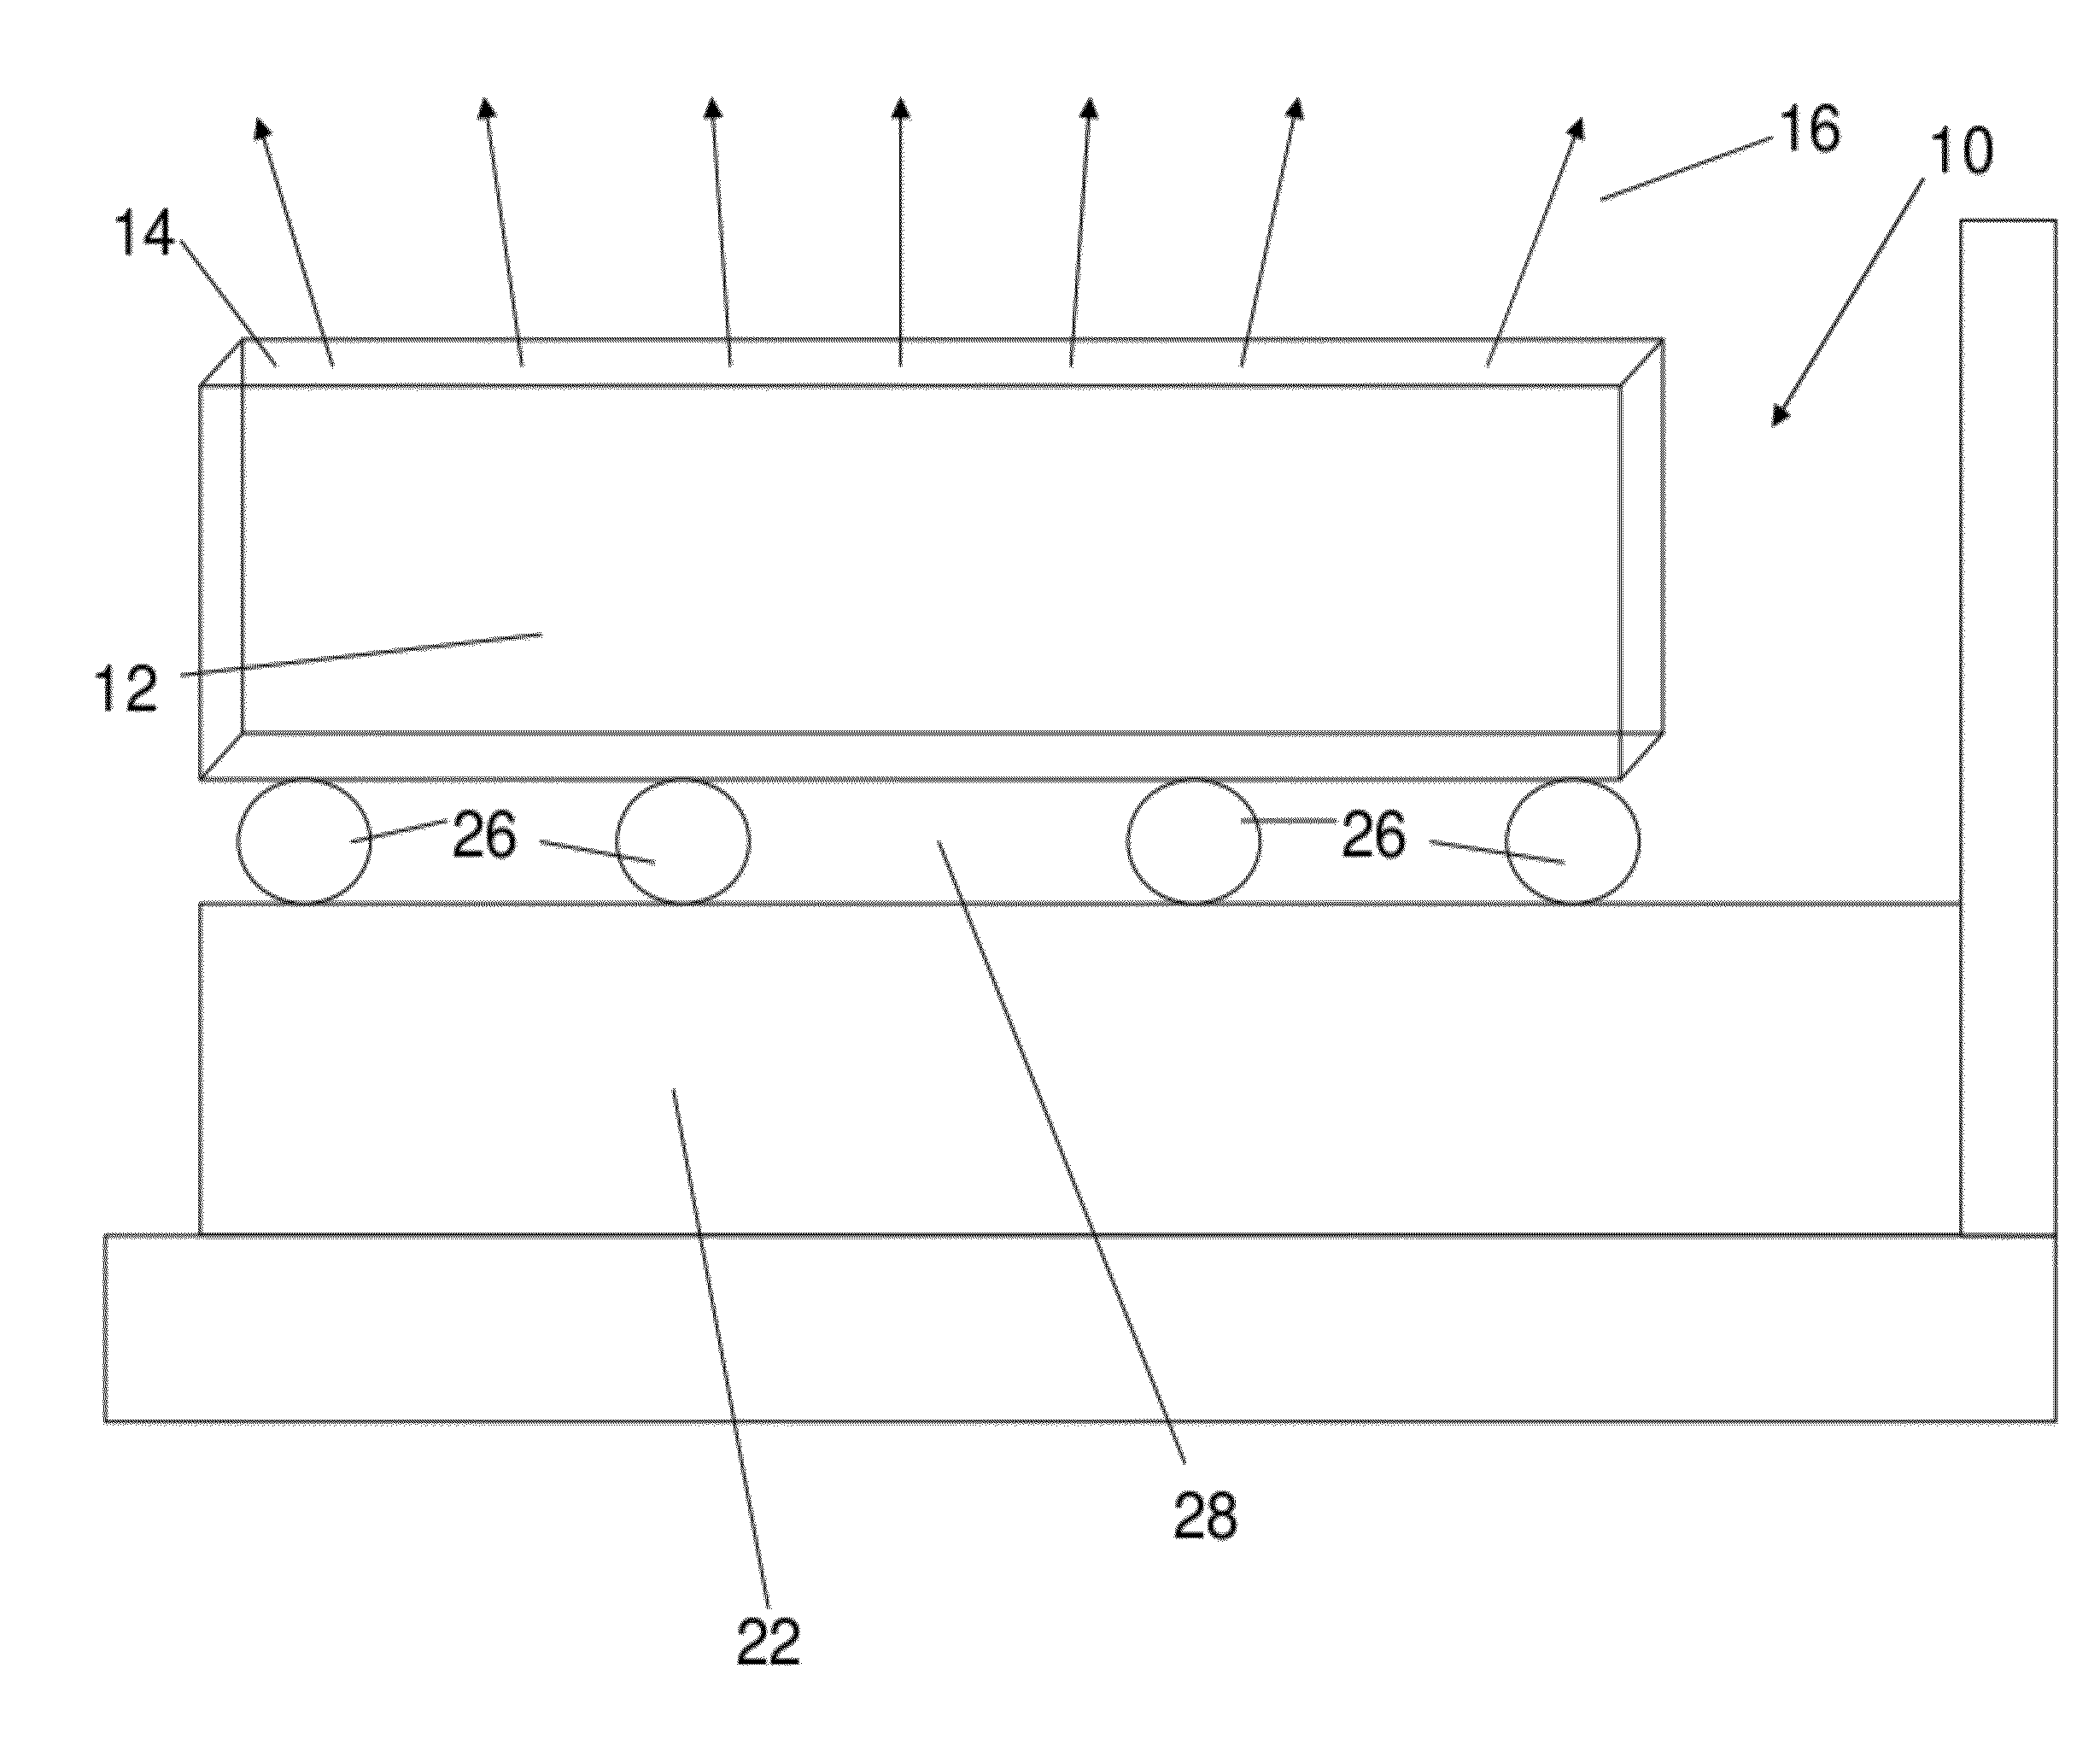 Ultrasound transducer and cooling thereof